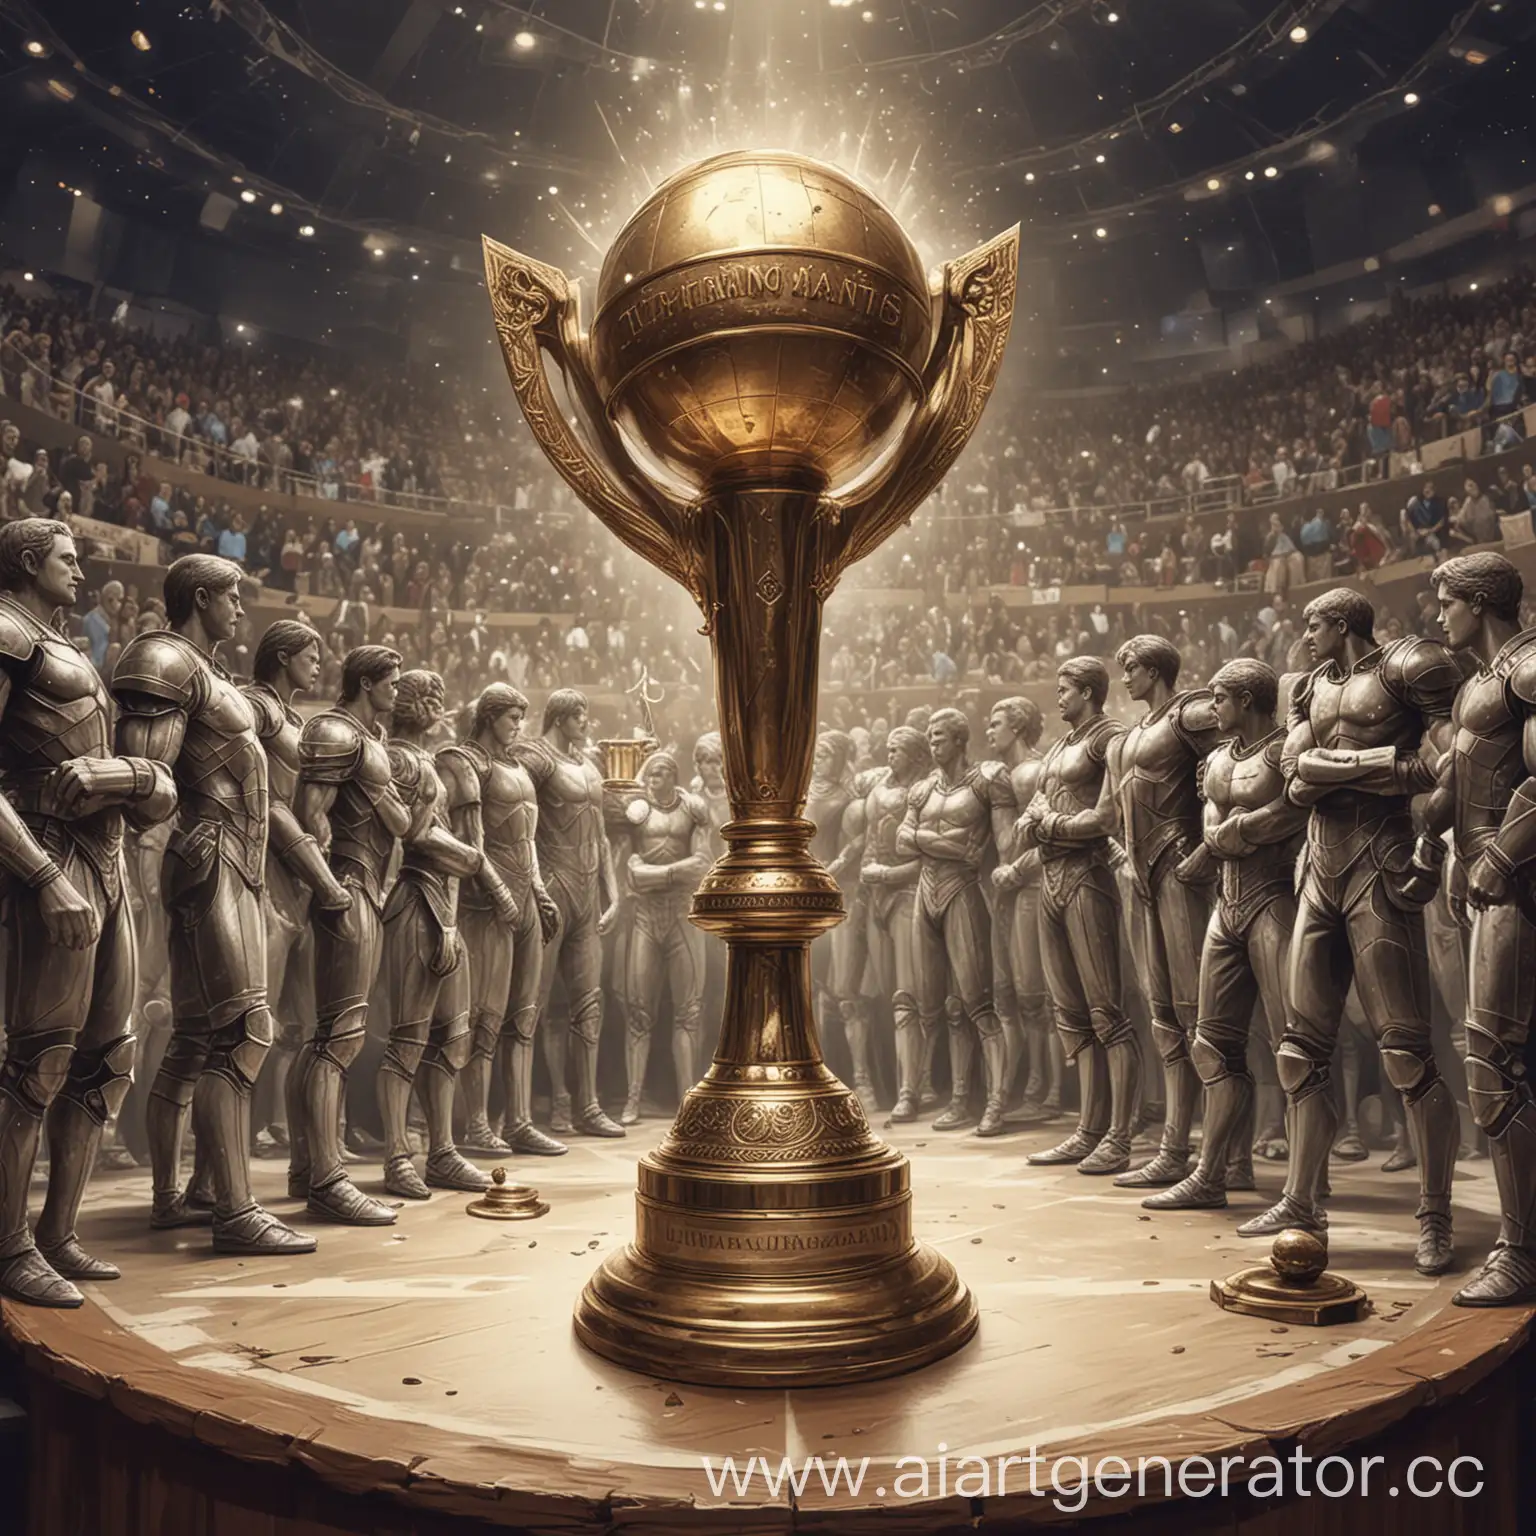 Debating-Championship-Cover-Art-Tournament-of-Champions-with-People-Cup-and-Muted-Tones